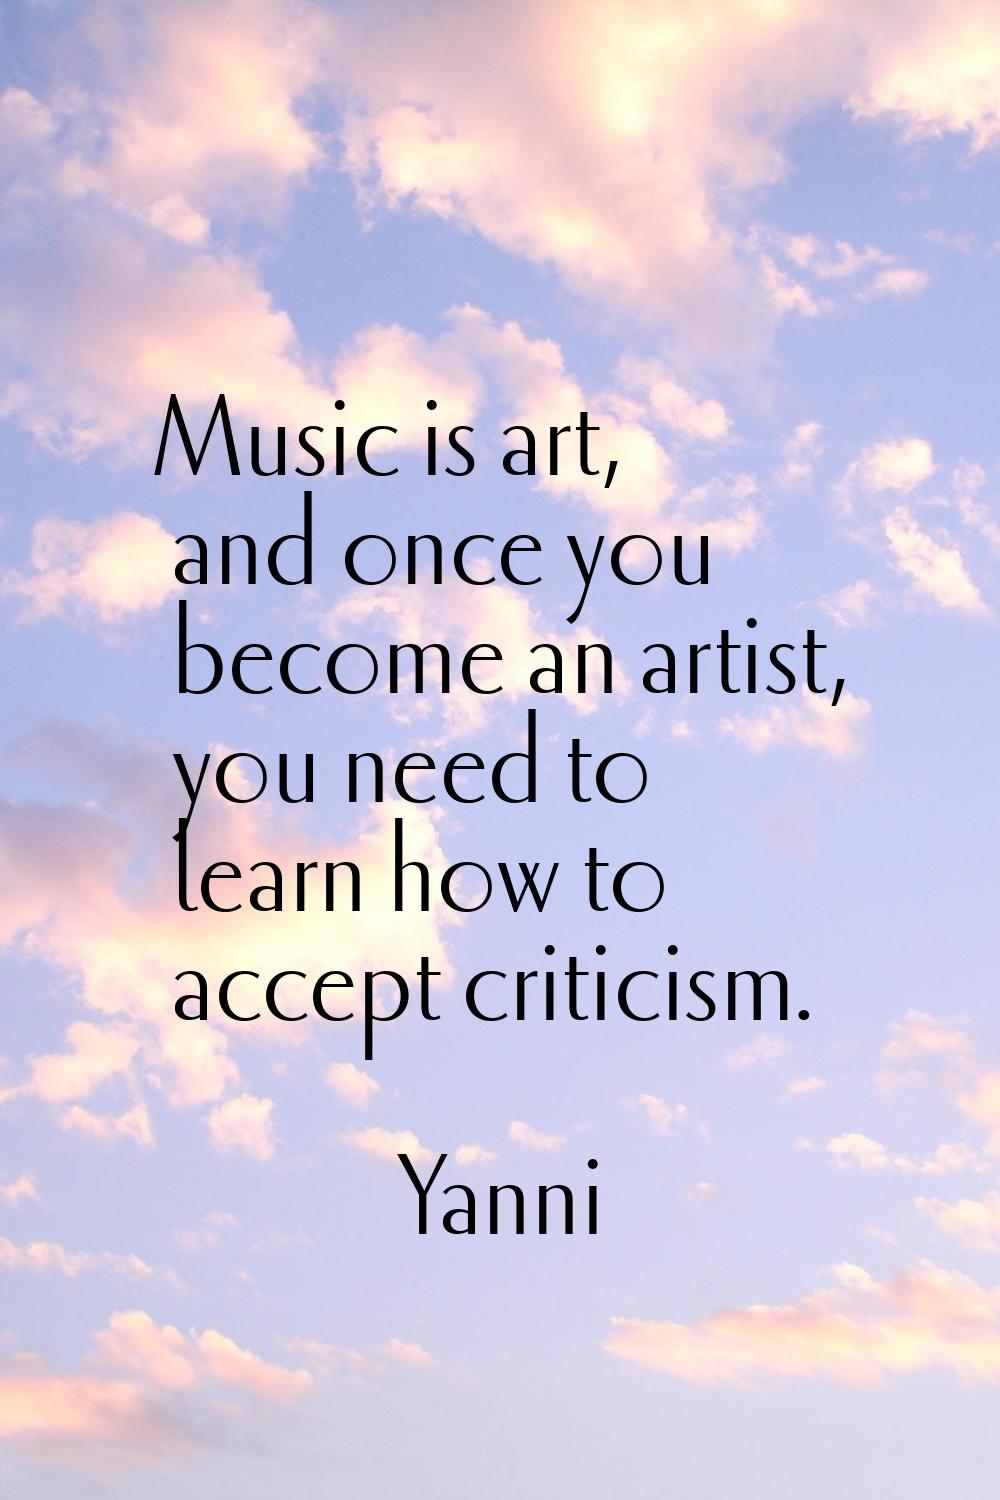 Music is art, and once you become an artist, you need to learn how to accept criticism.